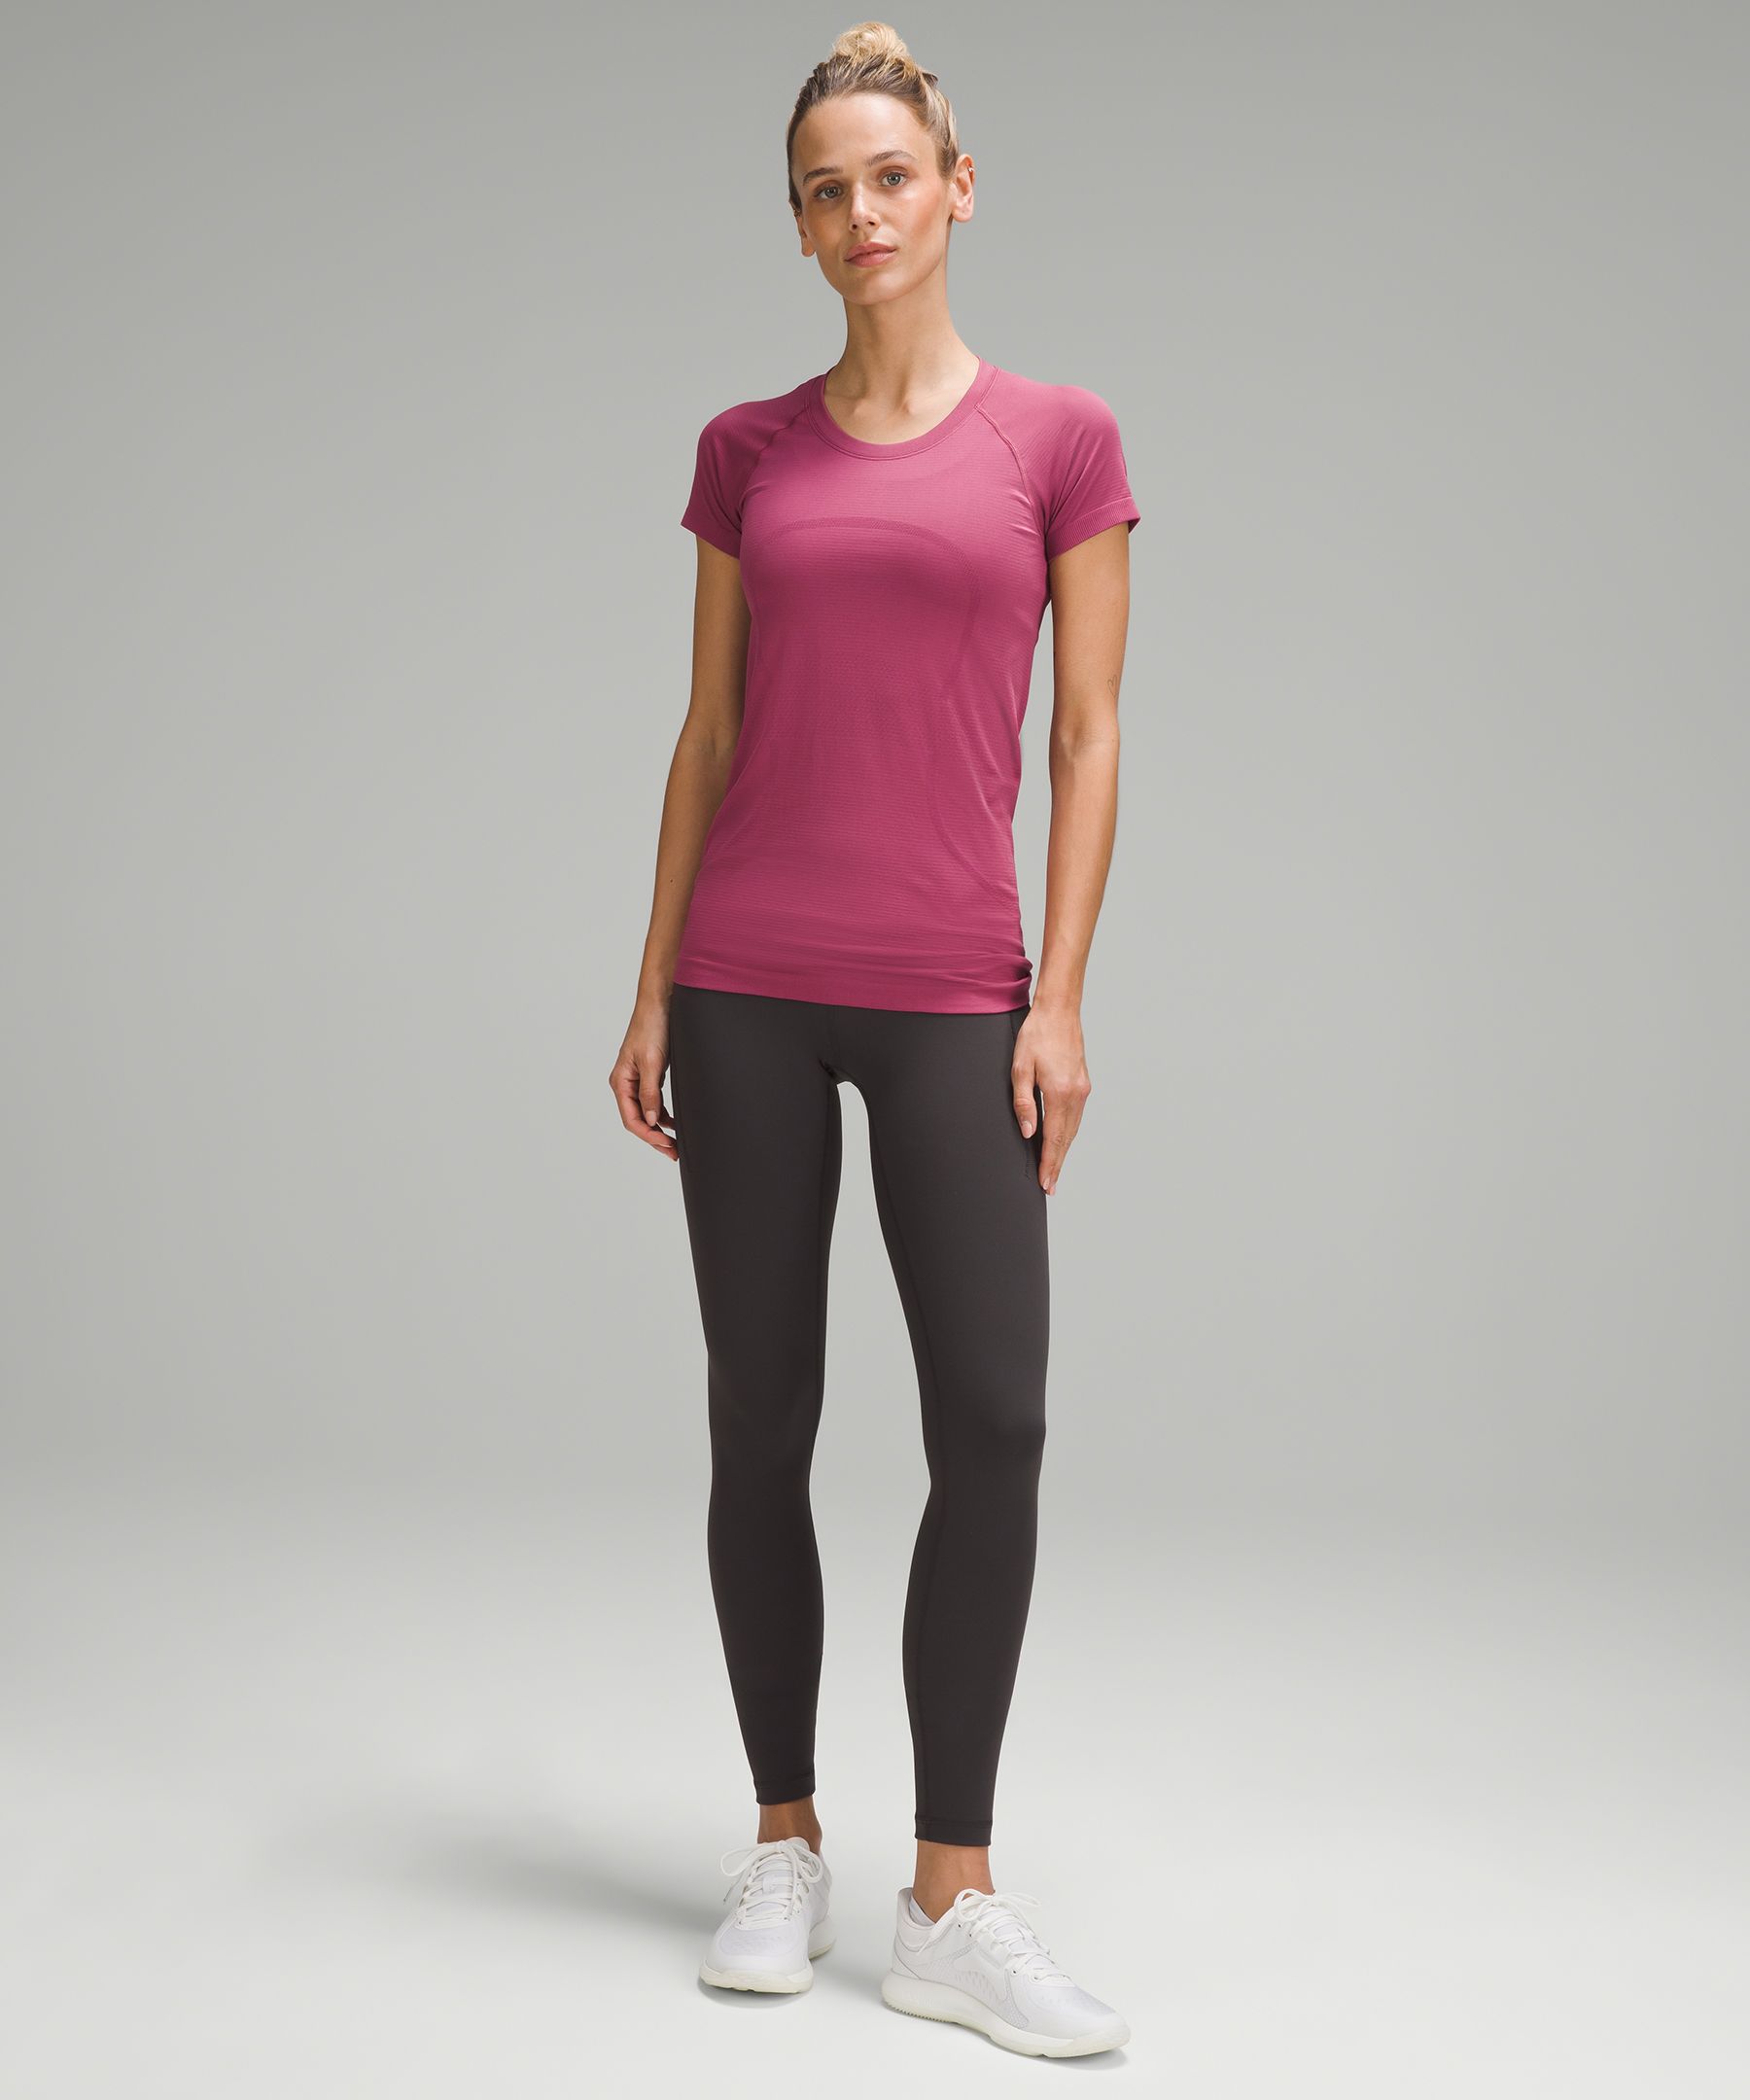 lululemon expert - Page 16 of 34 - Lululemon, Health and Fitness, Beauty  and Daily Discoveries